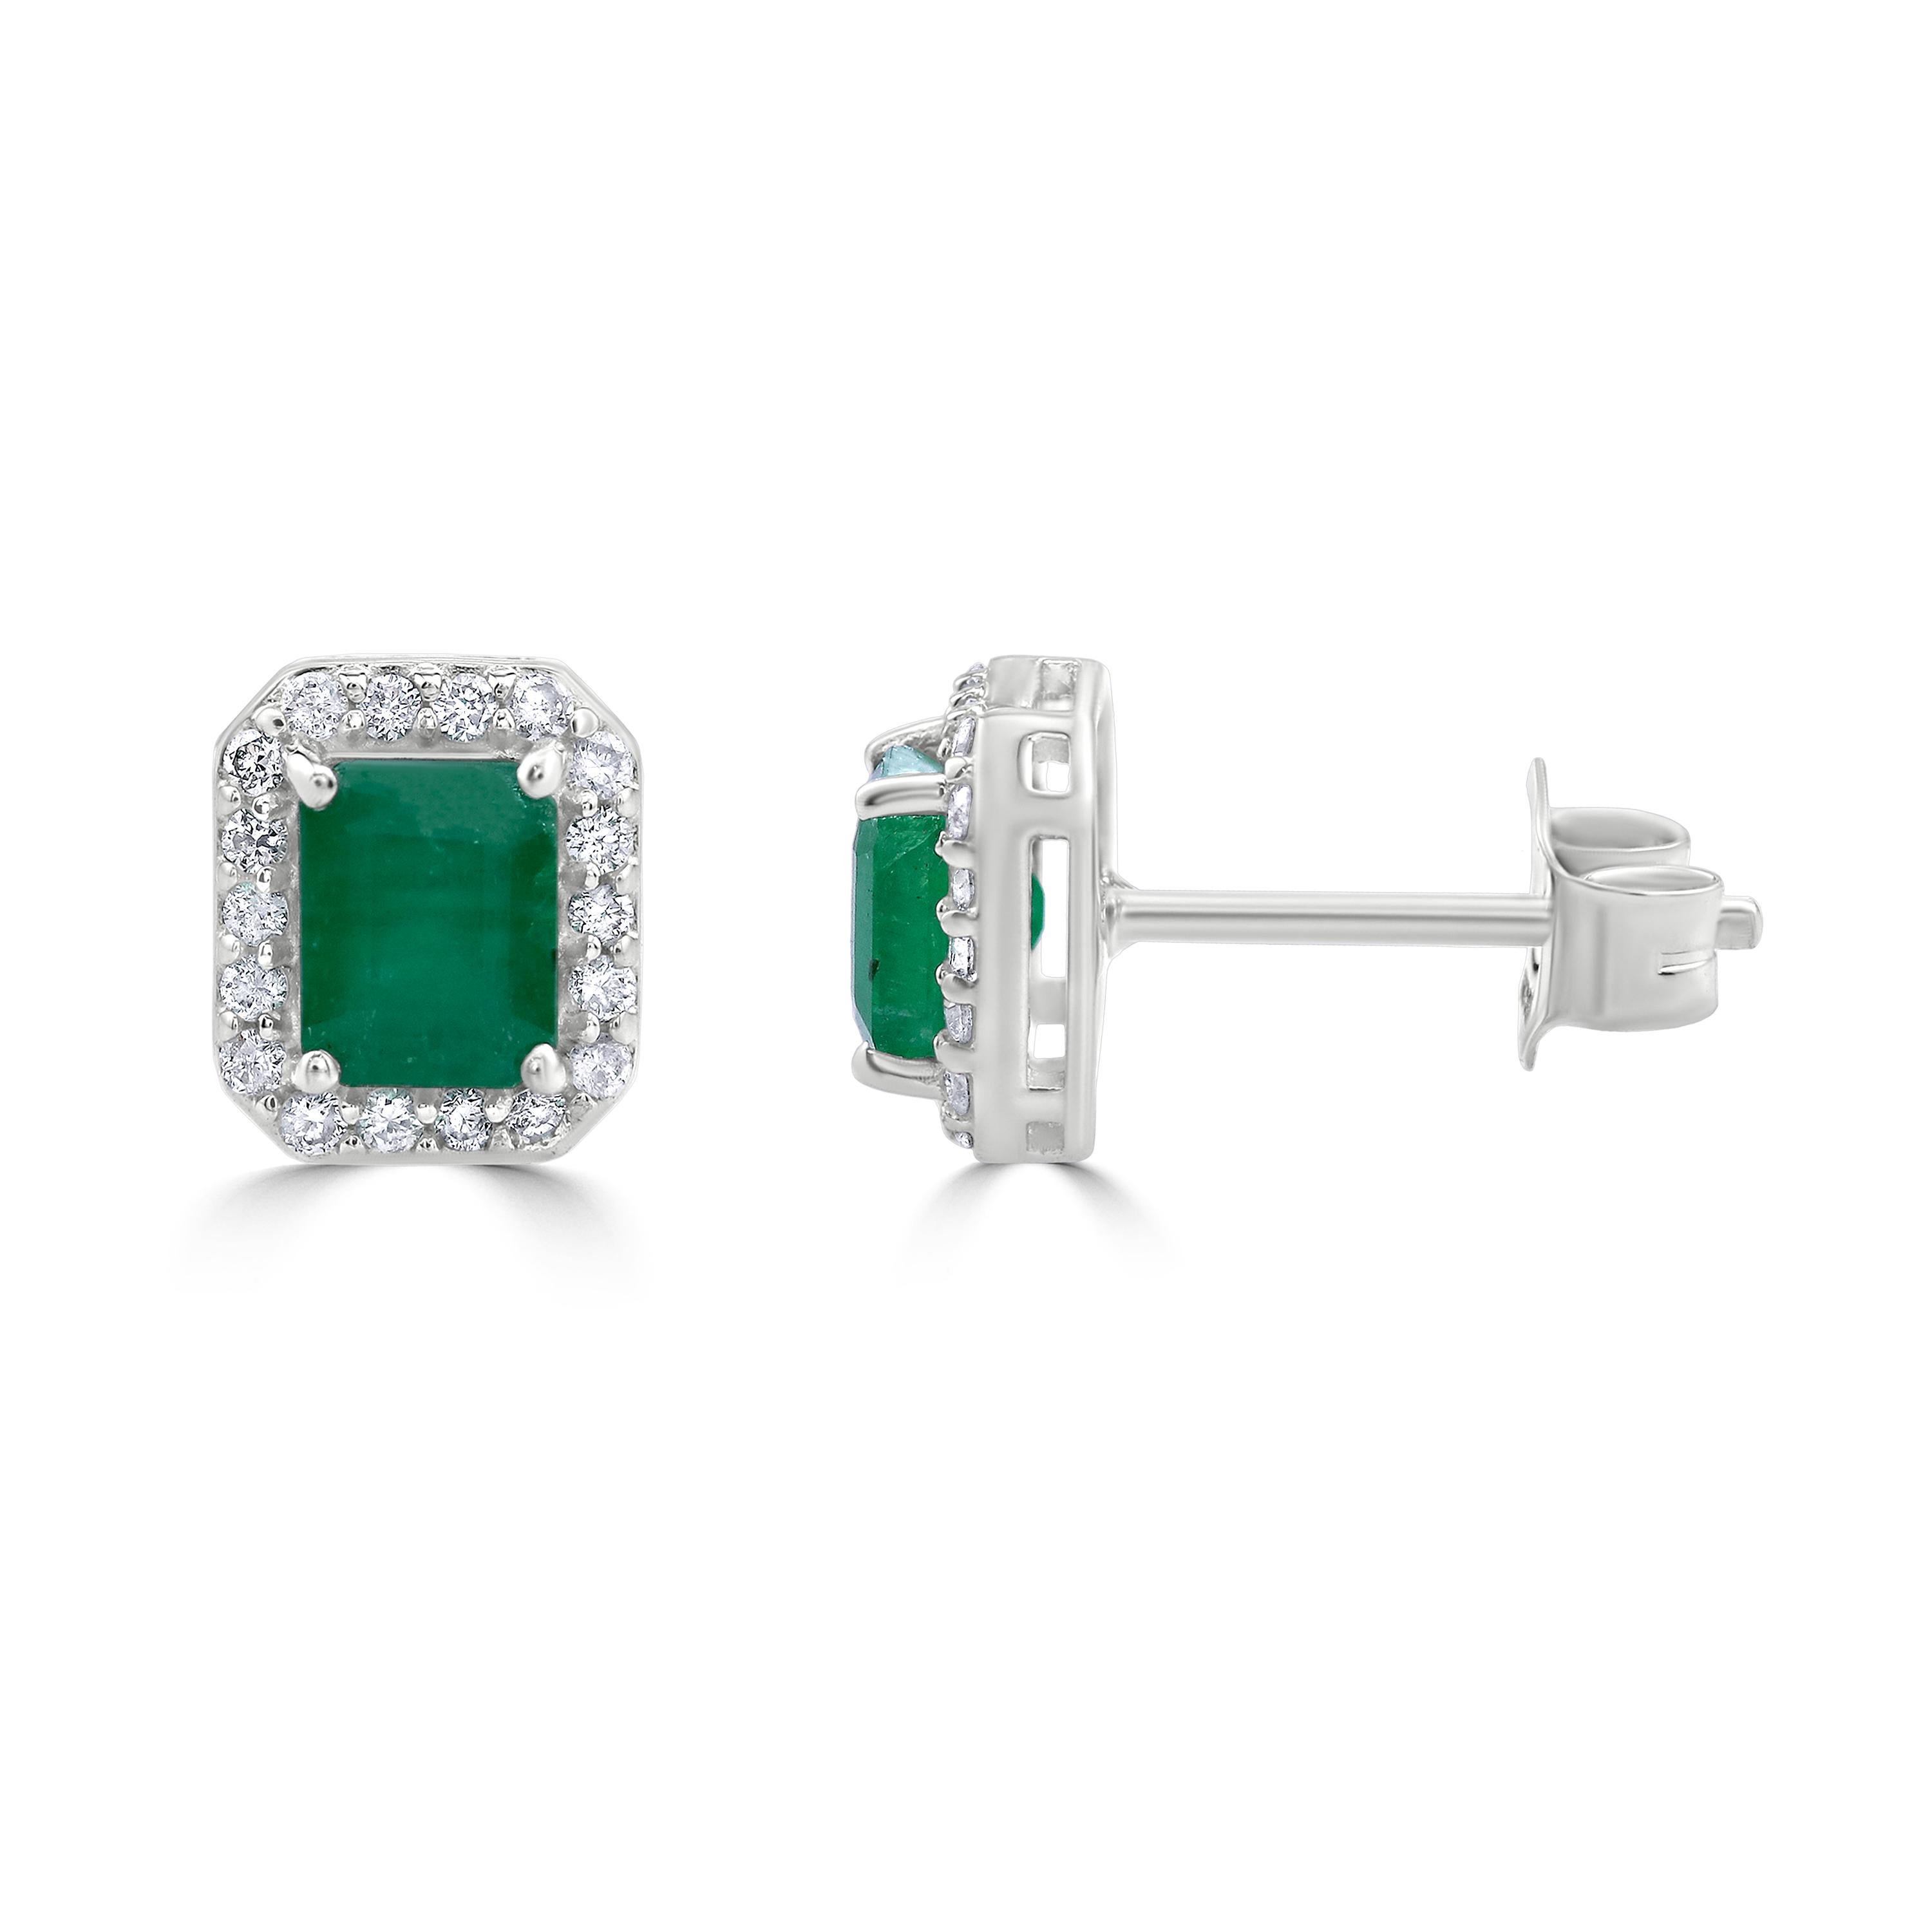 Contemporary Gemistry .98 Carats Octagon Emerald Stud Earrings with Diamond in 14K White Gold